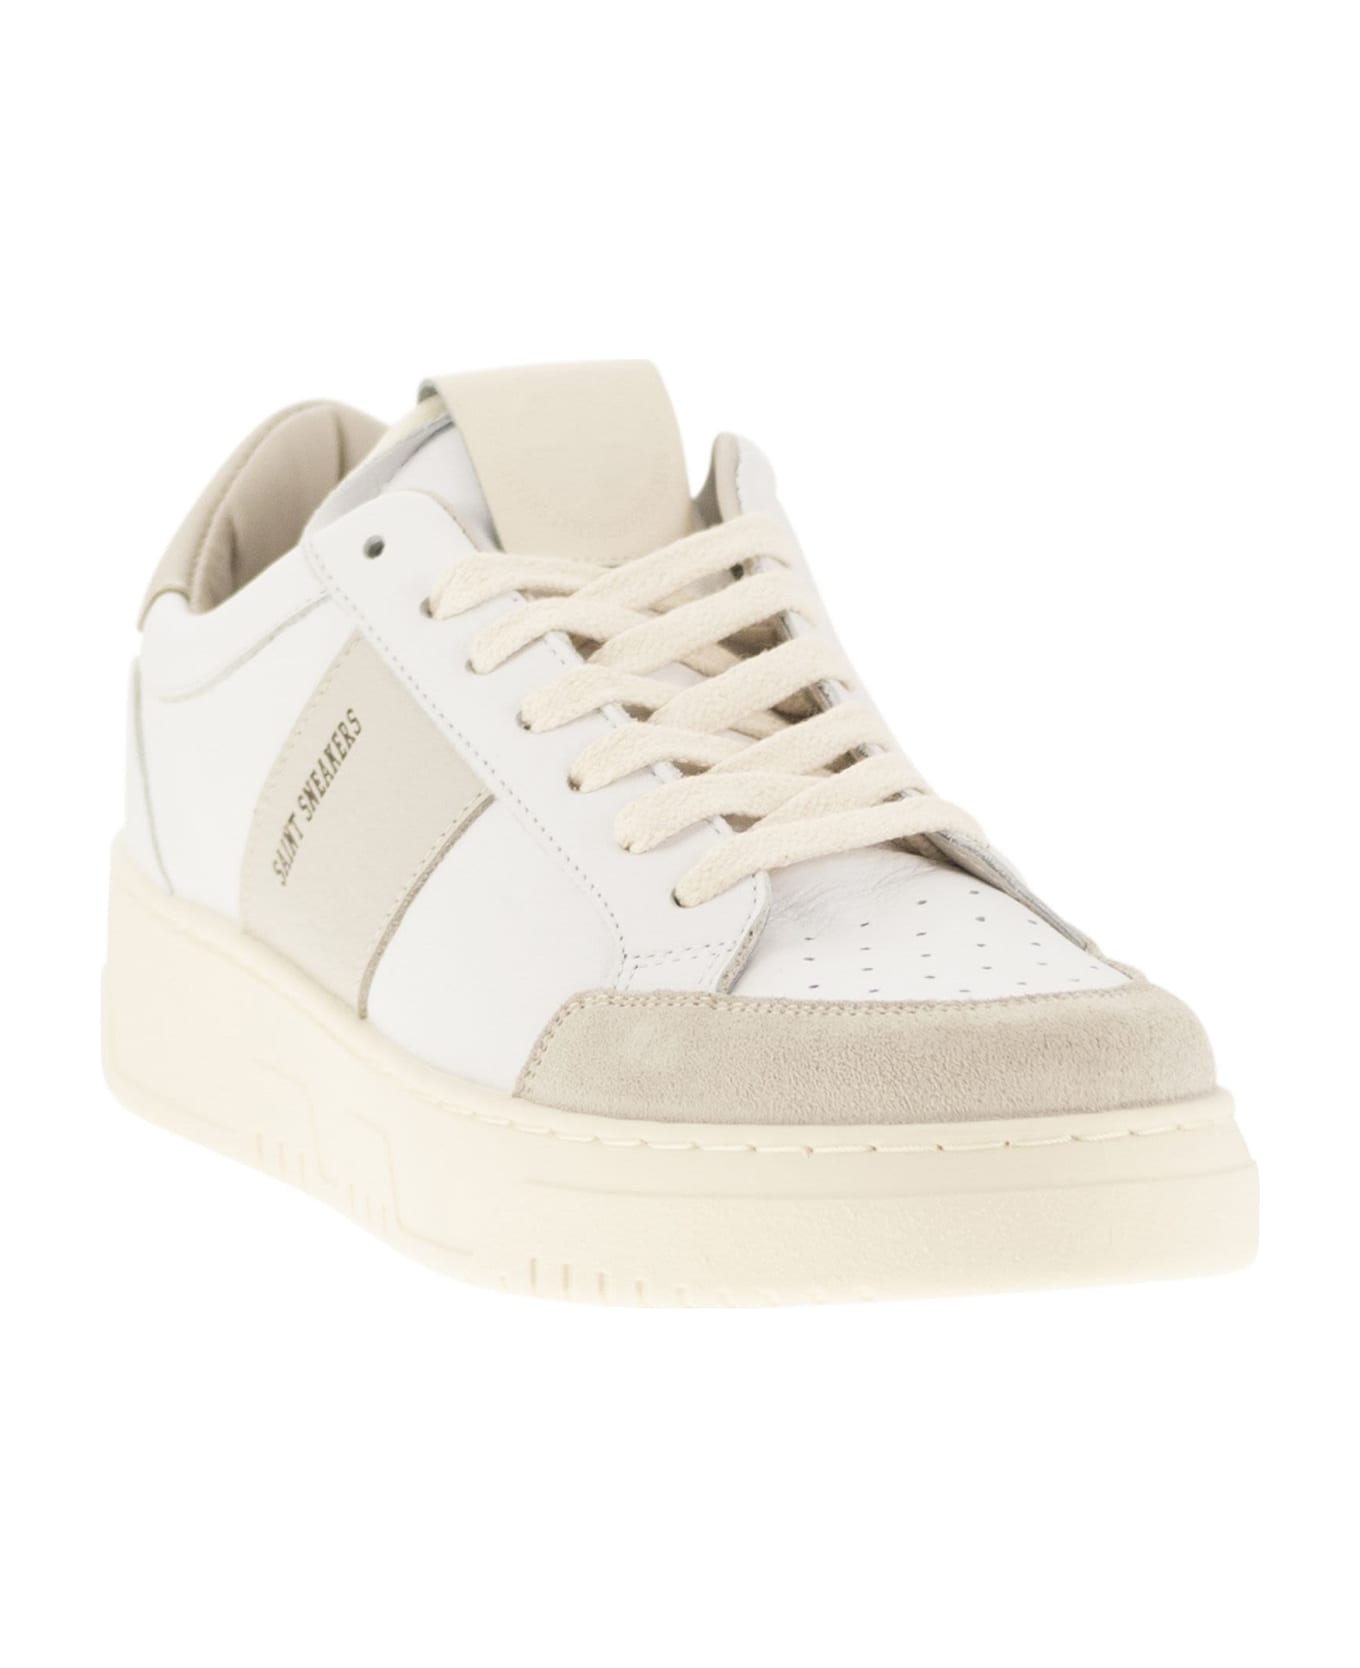 Saint Sneakers Sail - Leather And Suede Trainers - White/marble